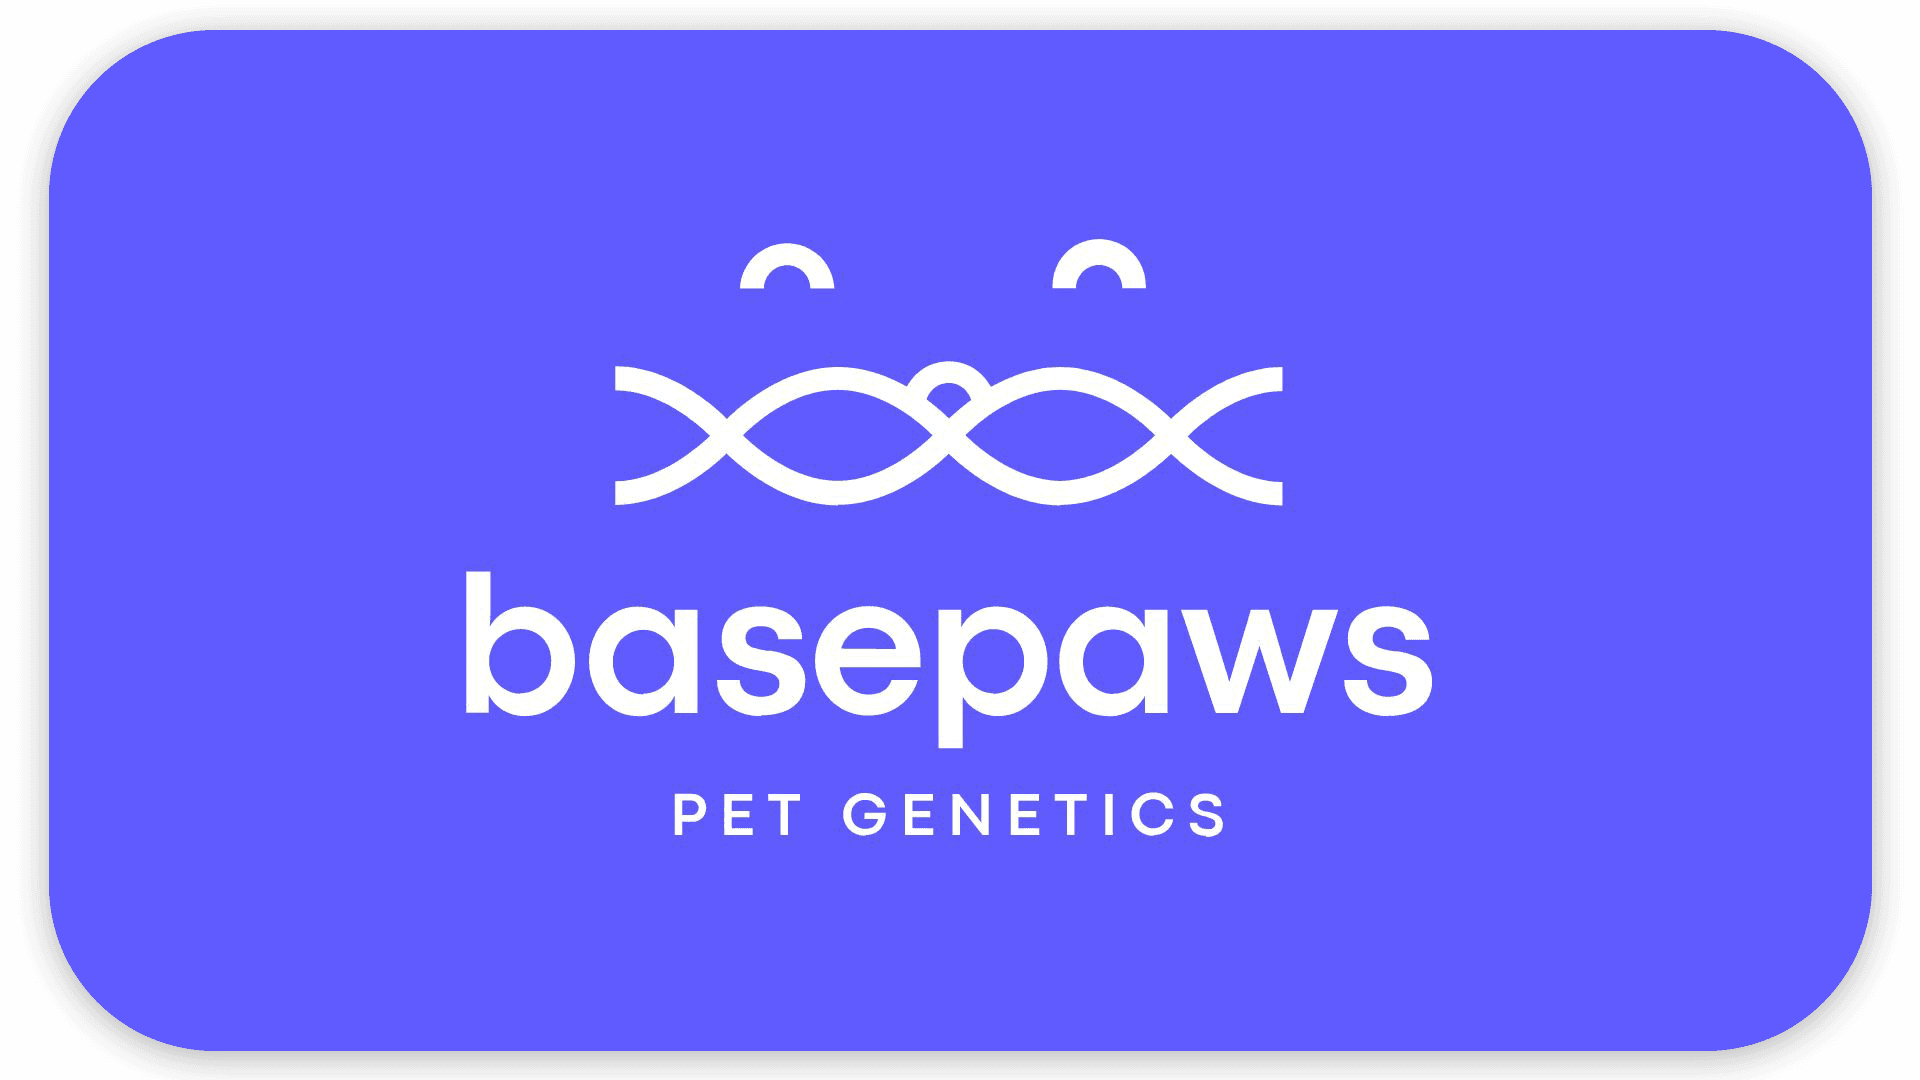 Logo of Basepaws Pet Genetics on a blue background featuring a DNA strand shaped like a cat's face above the text "basepaws" and "PET GENETICS.